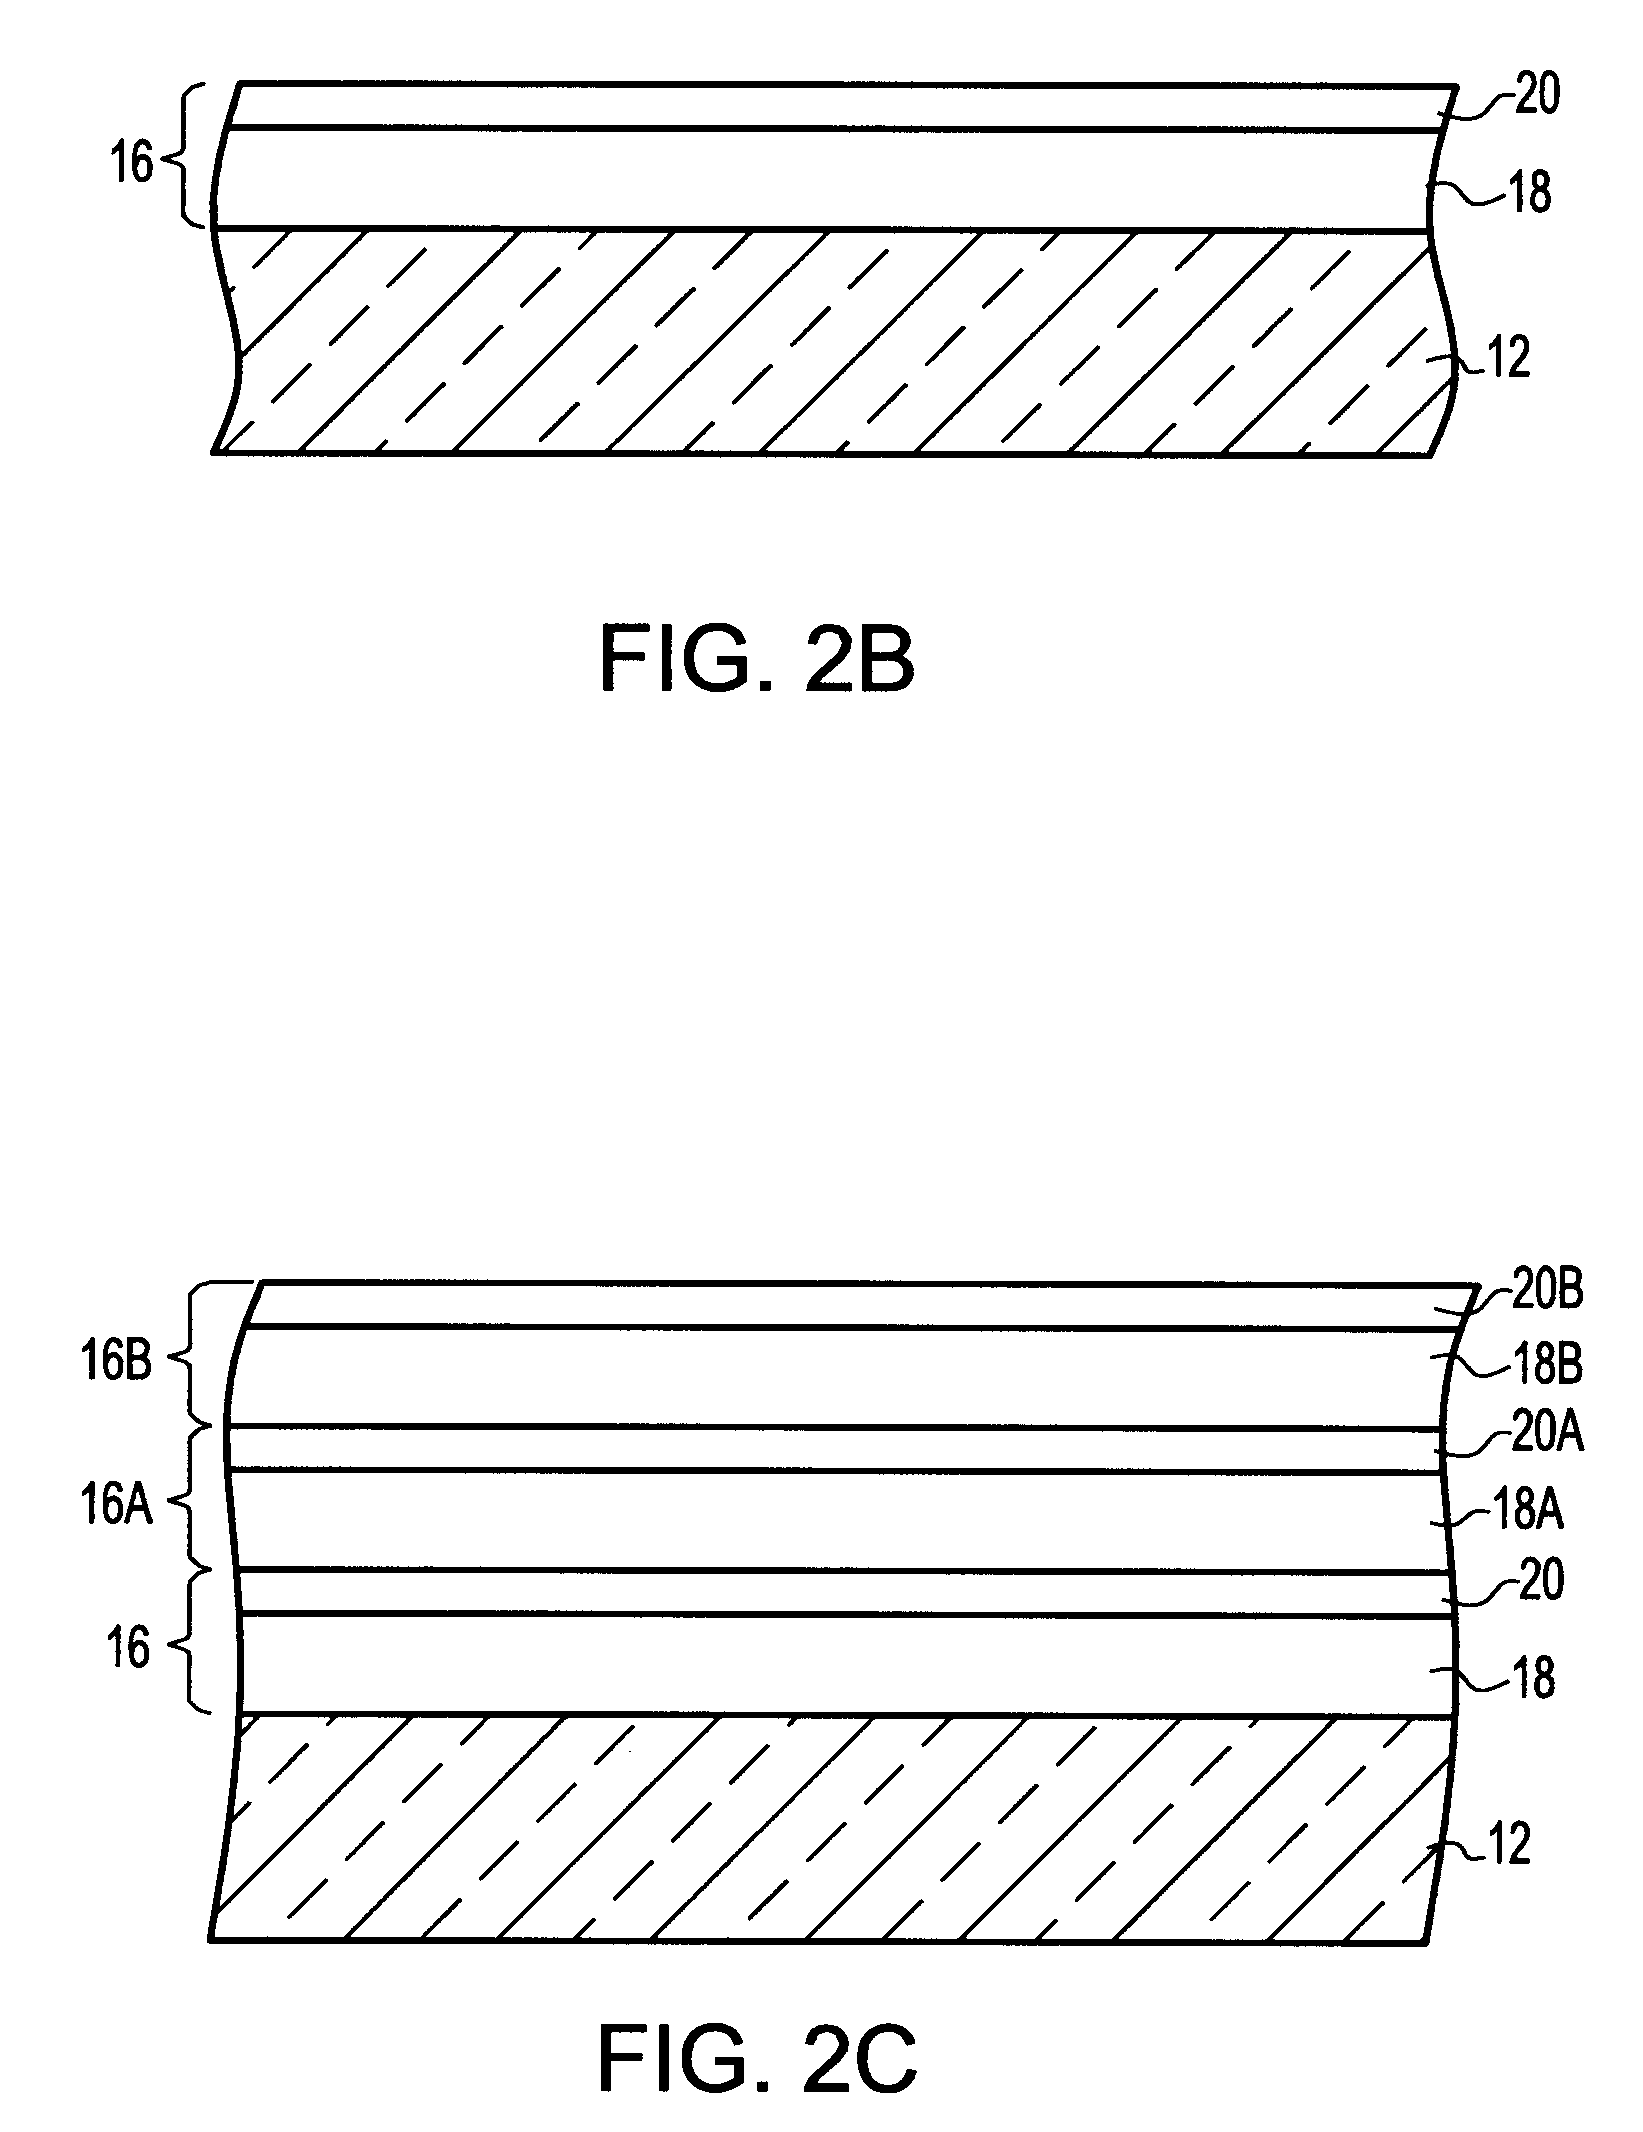 Method of producing highly strained pecvd silicon nitride thin films at low temperature